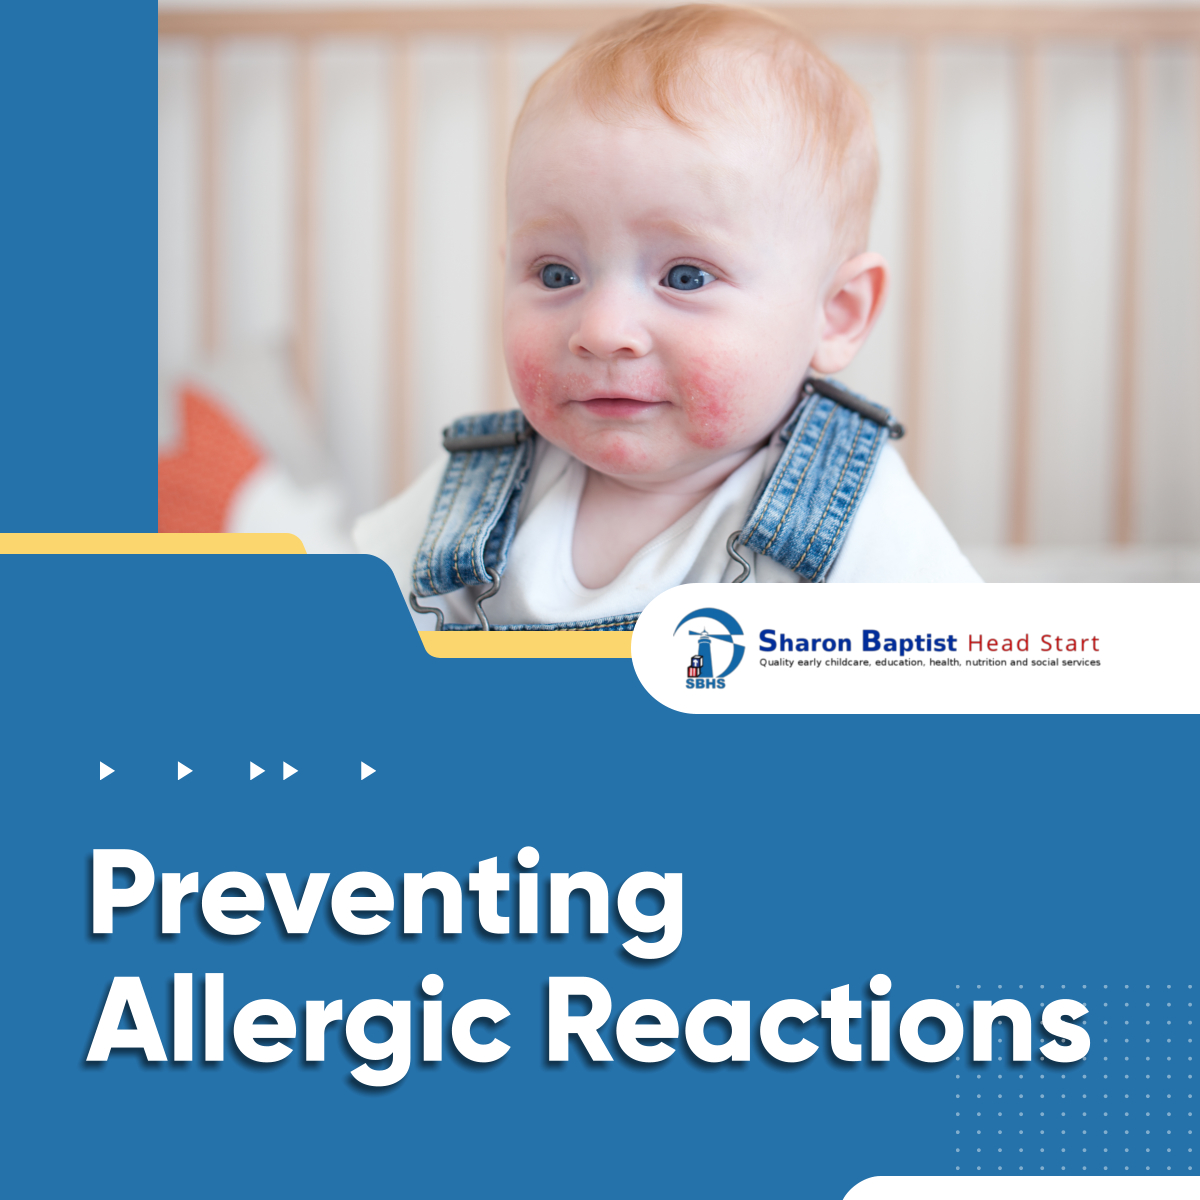 Children may not be cautious about what they eat. As a result, they may eat or have contact with food that causes an allergy. 

Read more: facebook.com/sharonbaptisth…

#Childcare #AllergicReactions #Allergies